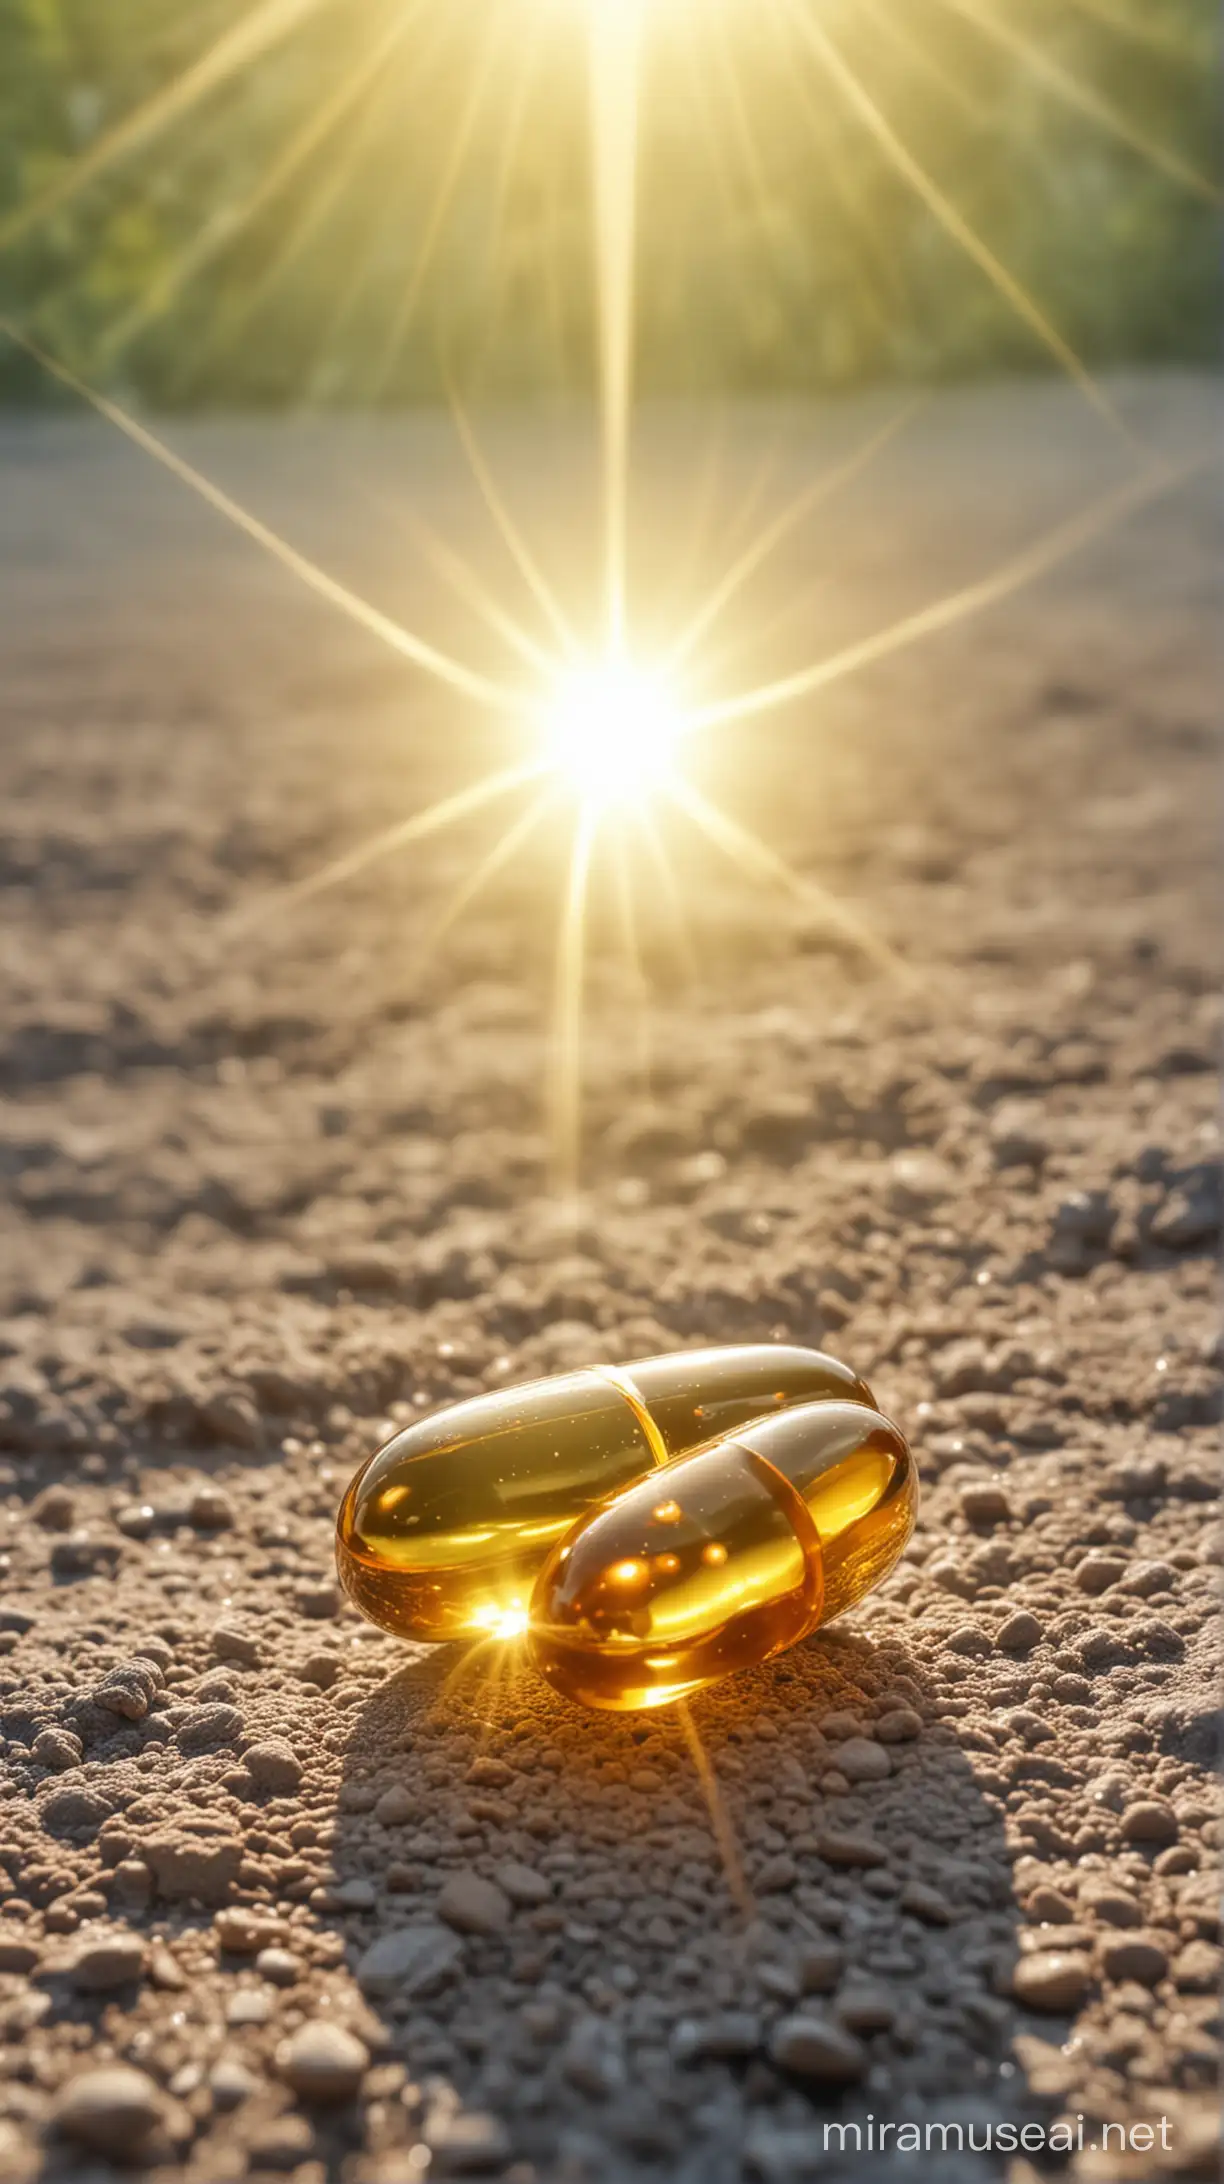 Vibrant Vitamin K Capsule in Natural Sunlight Enhanced 4K HDR Image with Morning Time Glow